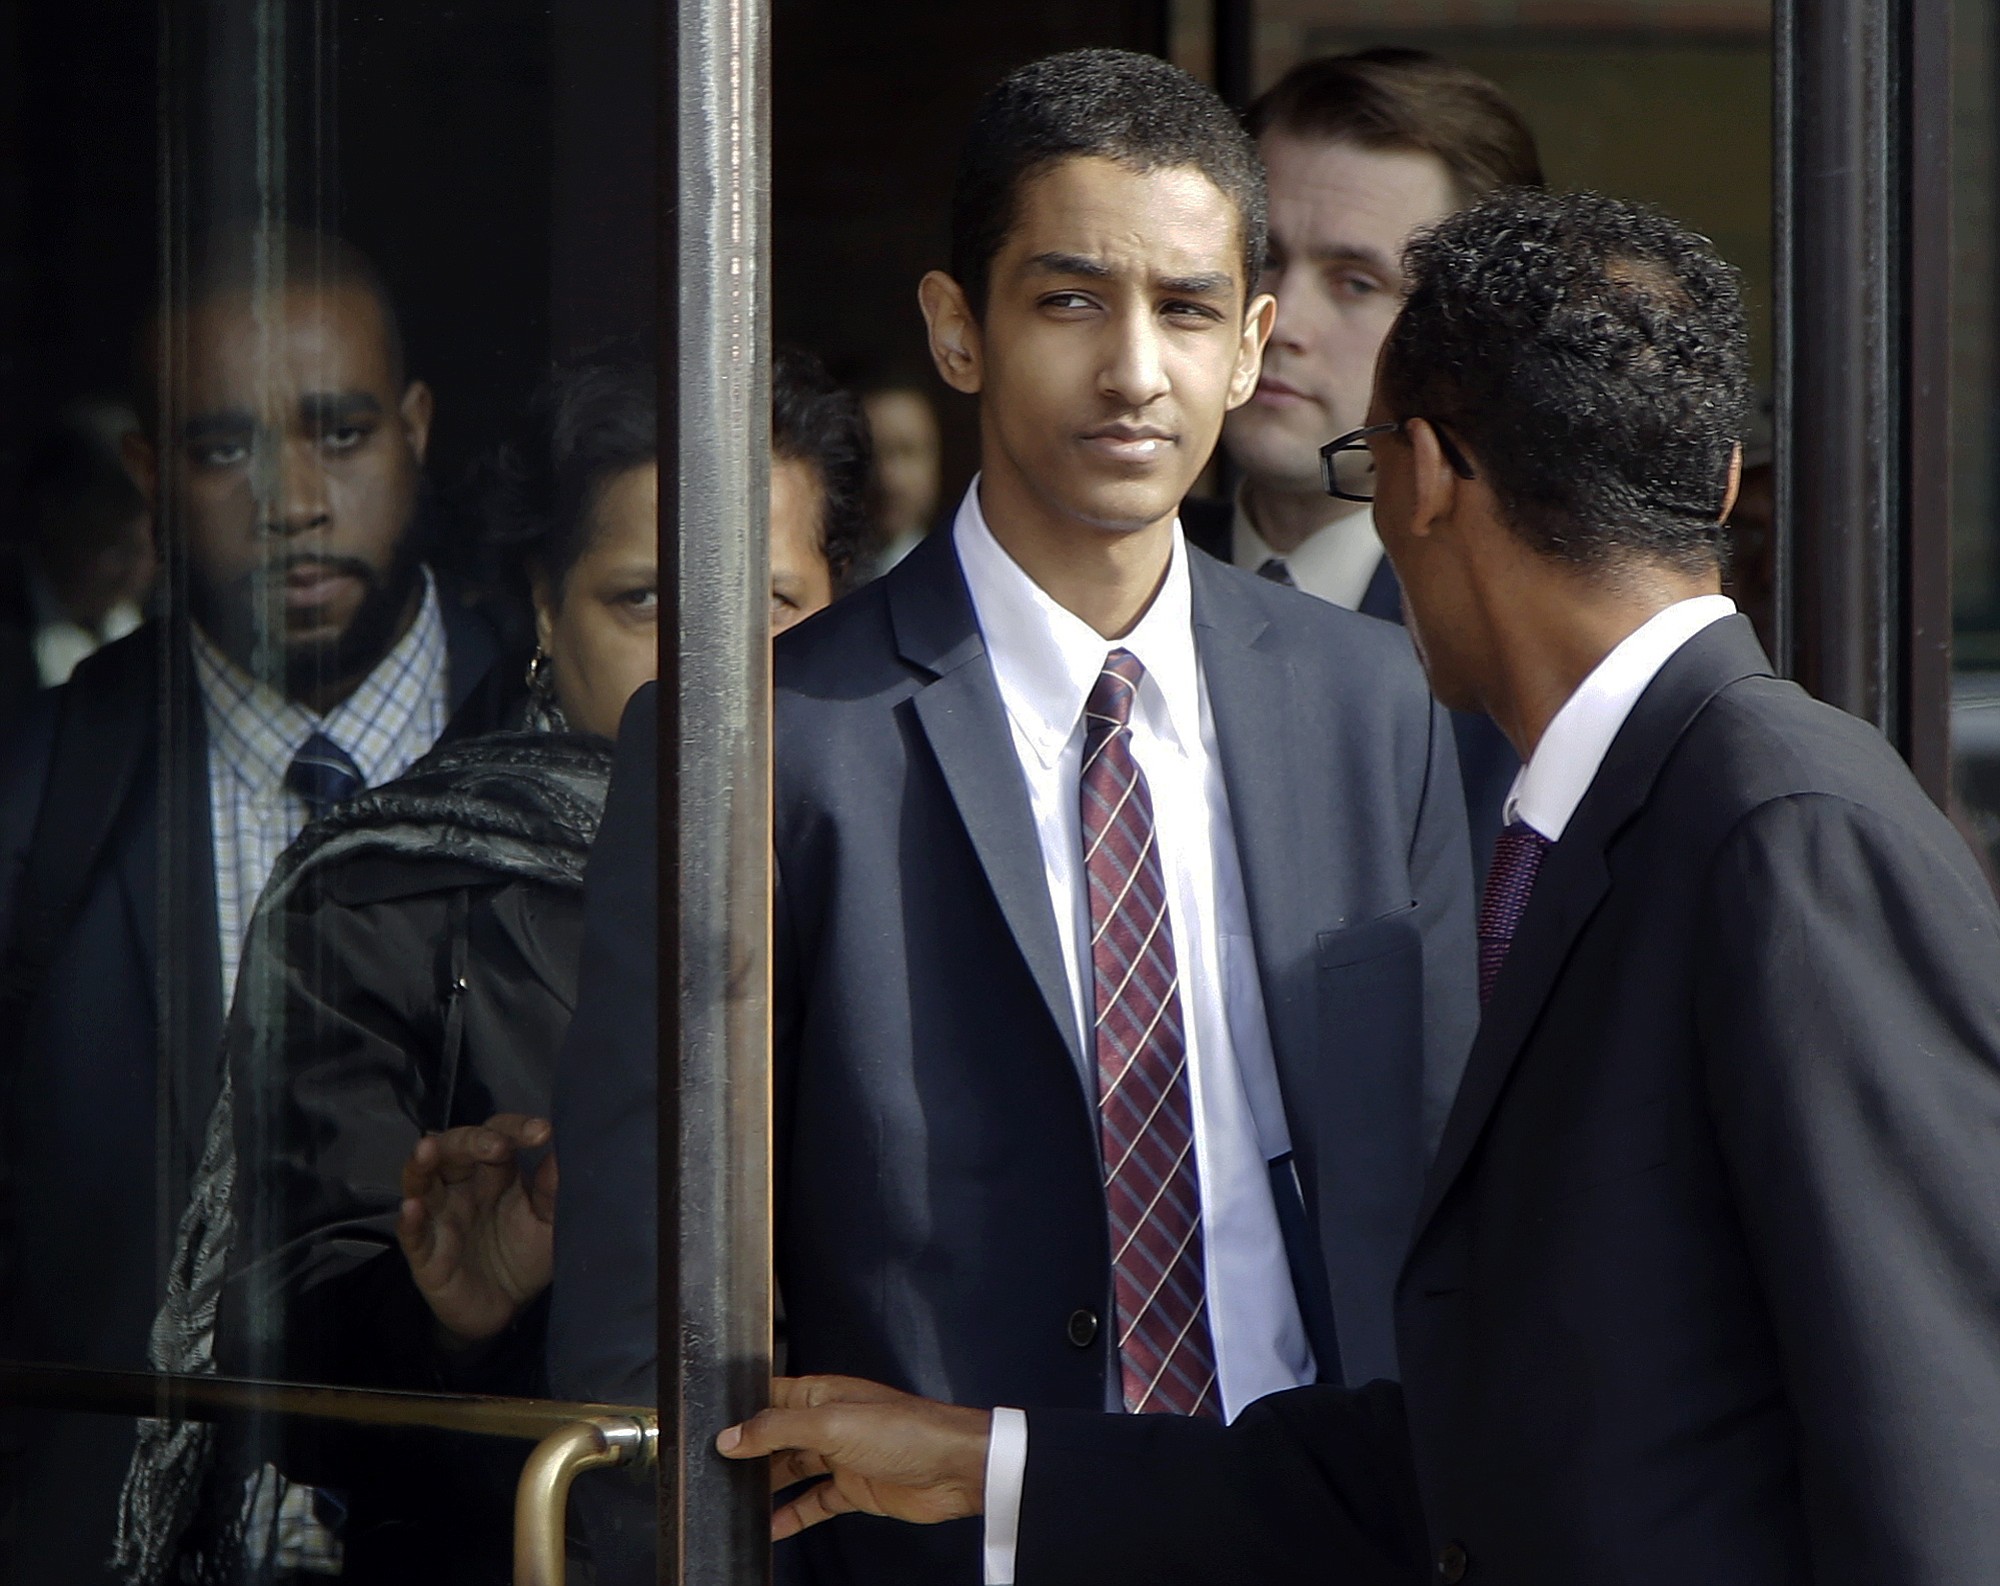 Robel Phillipos, center, departs federal court with defense attorney Derege Demissie, right, after he was convicted in Boston on Tuesday on two counts of lying about being in the dorm room of Boston Marathon bombing suspect Dzhokhar Tsarnaev three days after the bombing in 2013, while two other friends removed a backpack containing fireworks and other potential evidence.